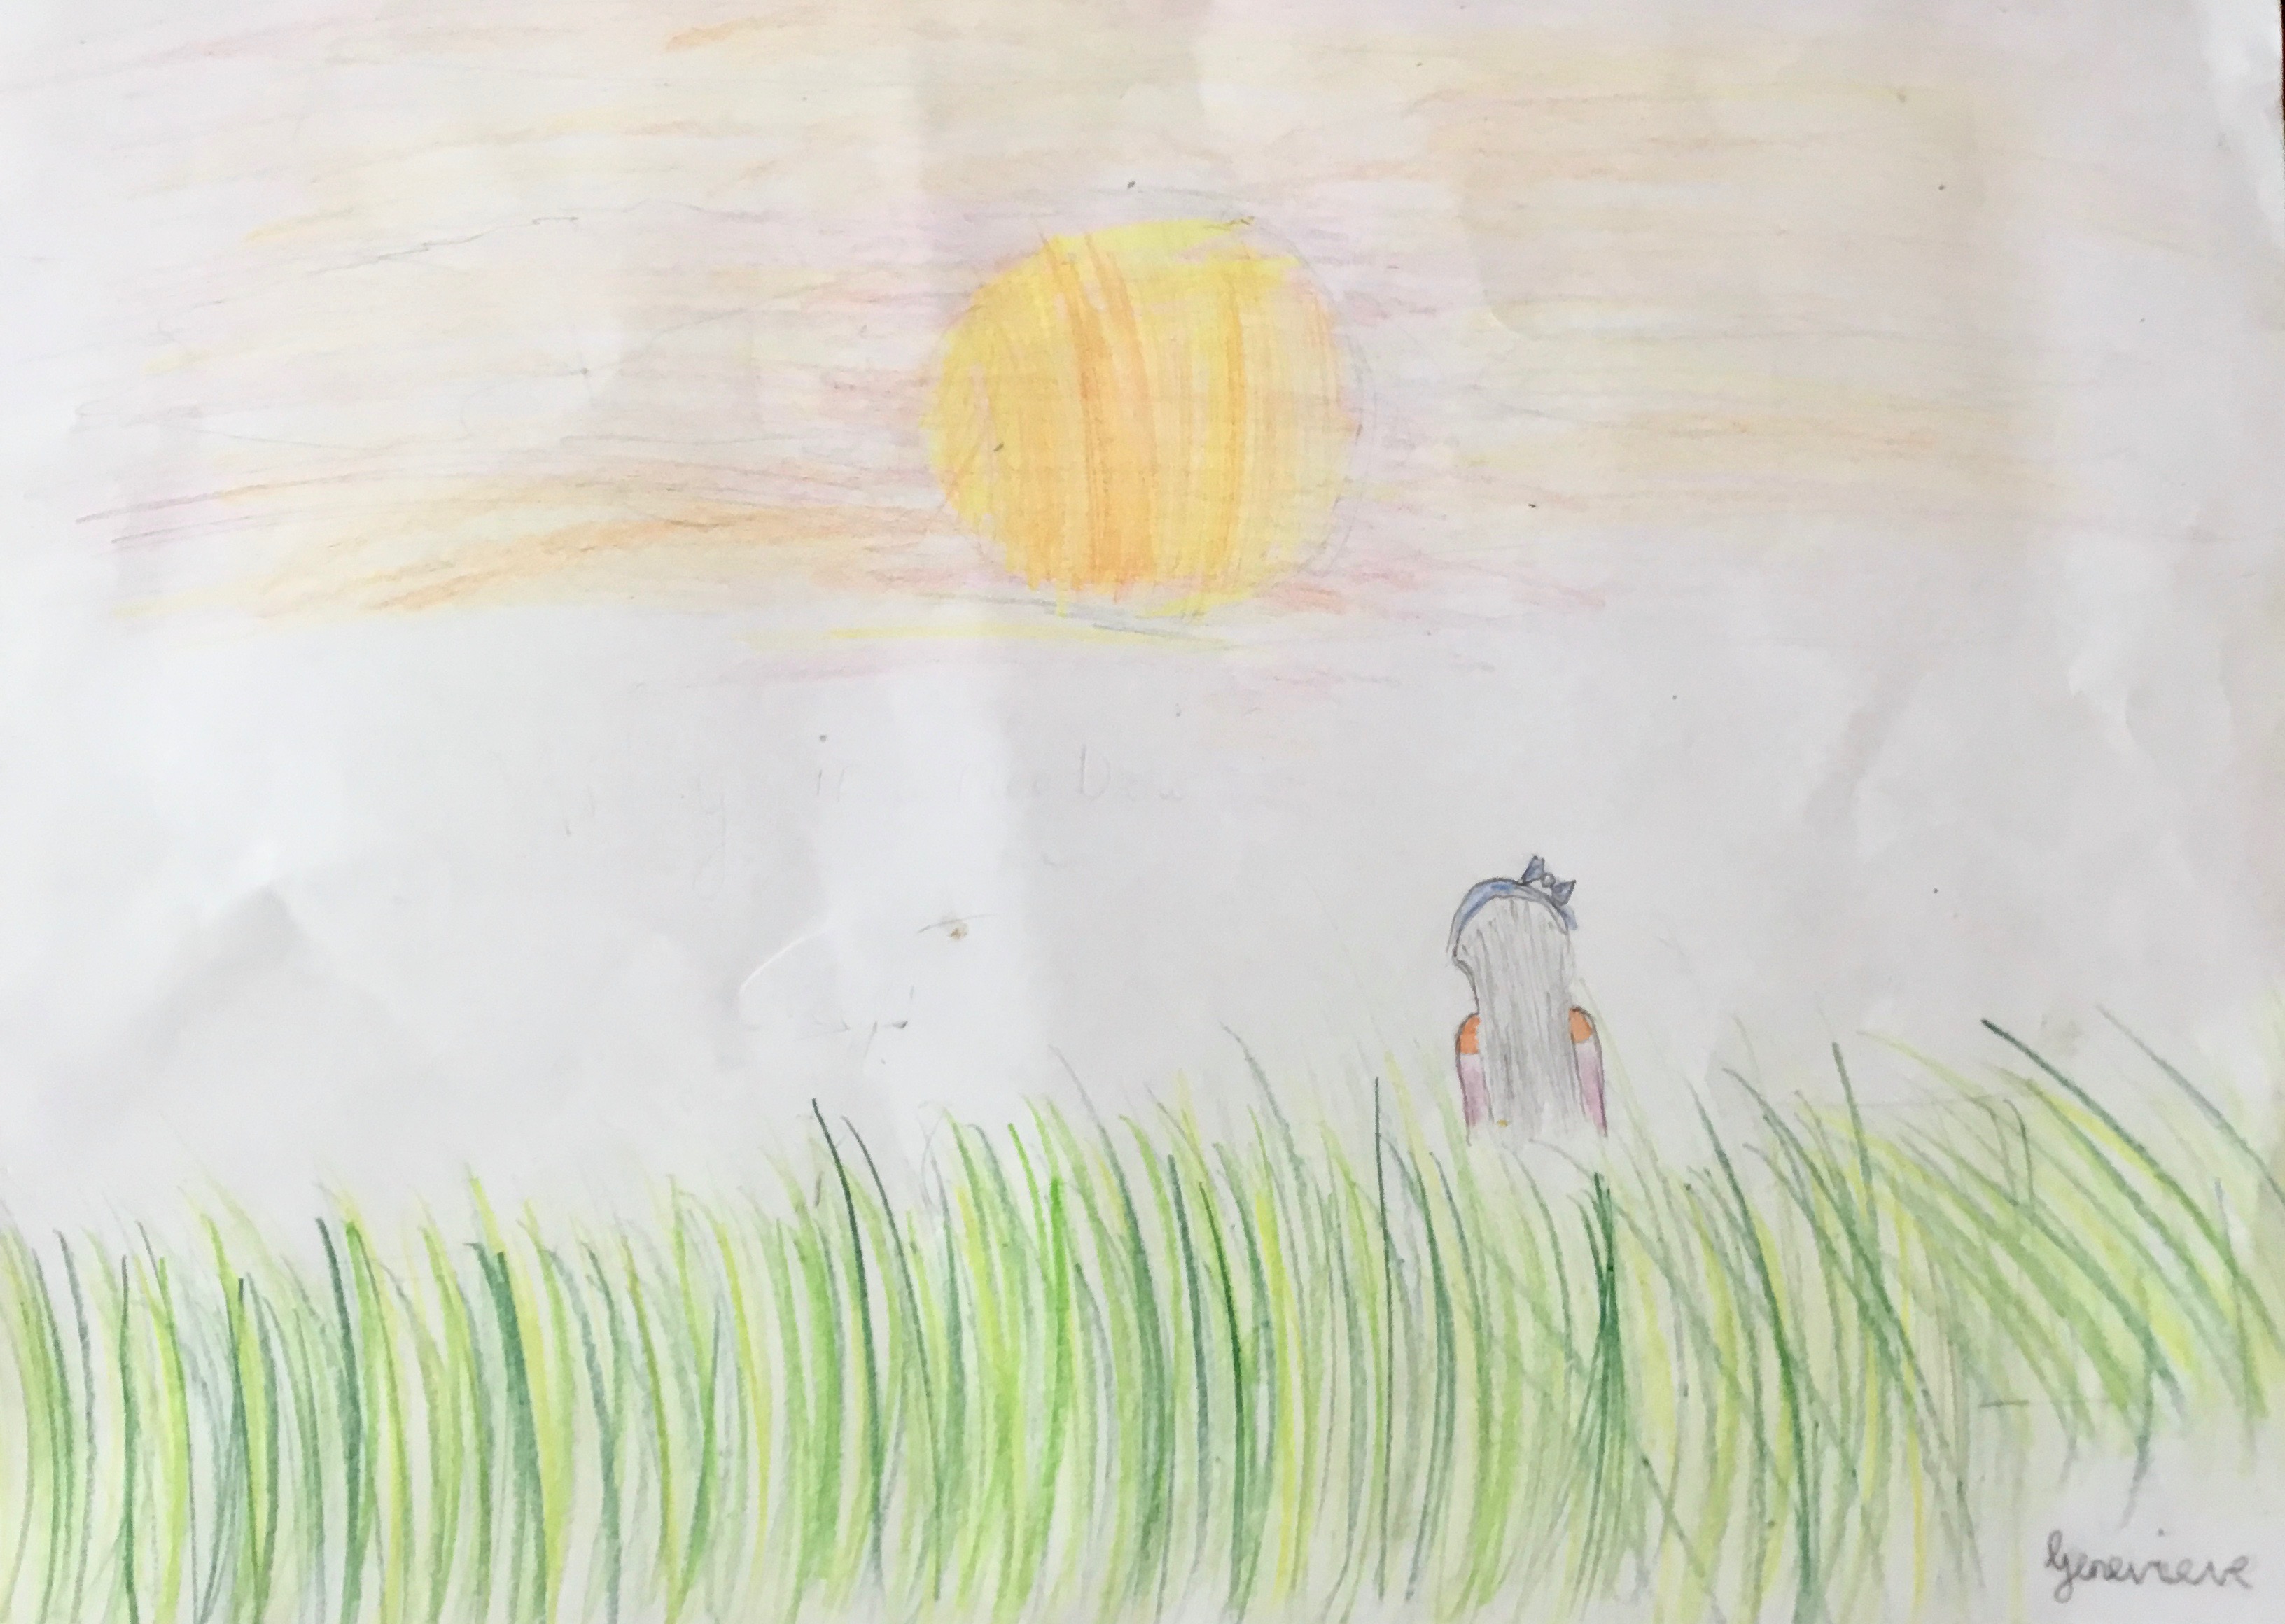 'A brighter future' by Genevieve (9) from Clare